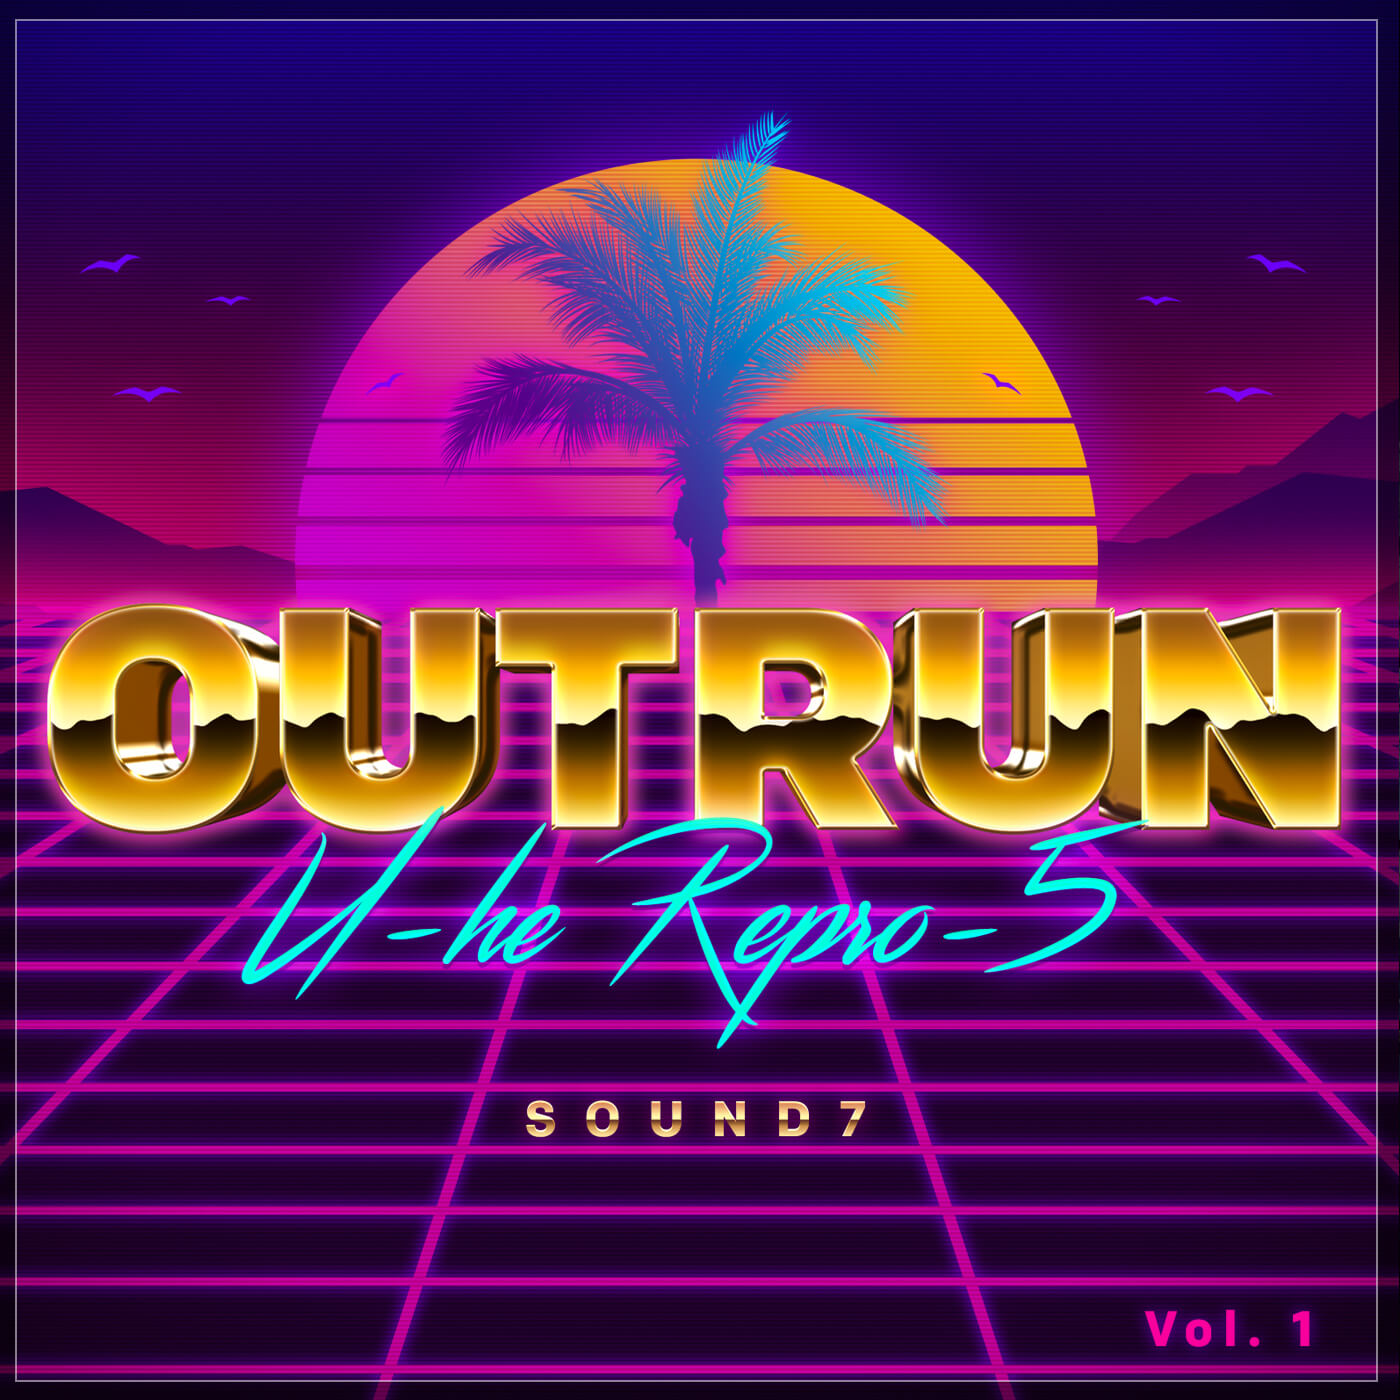 repro-5 outrun and synthwave presets made to bring you Ultra classic tones inspired from consoles, retro, synthwave, vaporwave and outrun styles. These Synthwave presets will allow you to upgrade your sounds across the spectrum of your electronic music requirements.